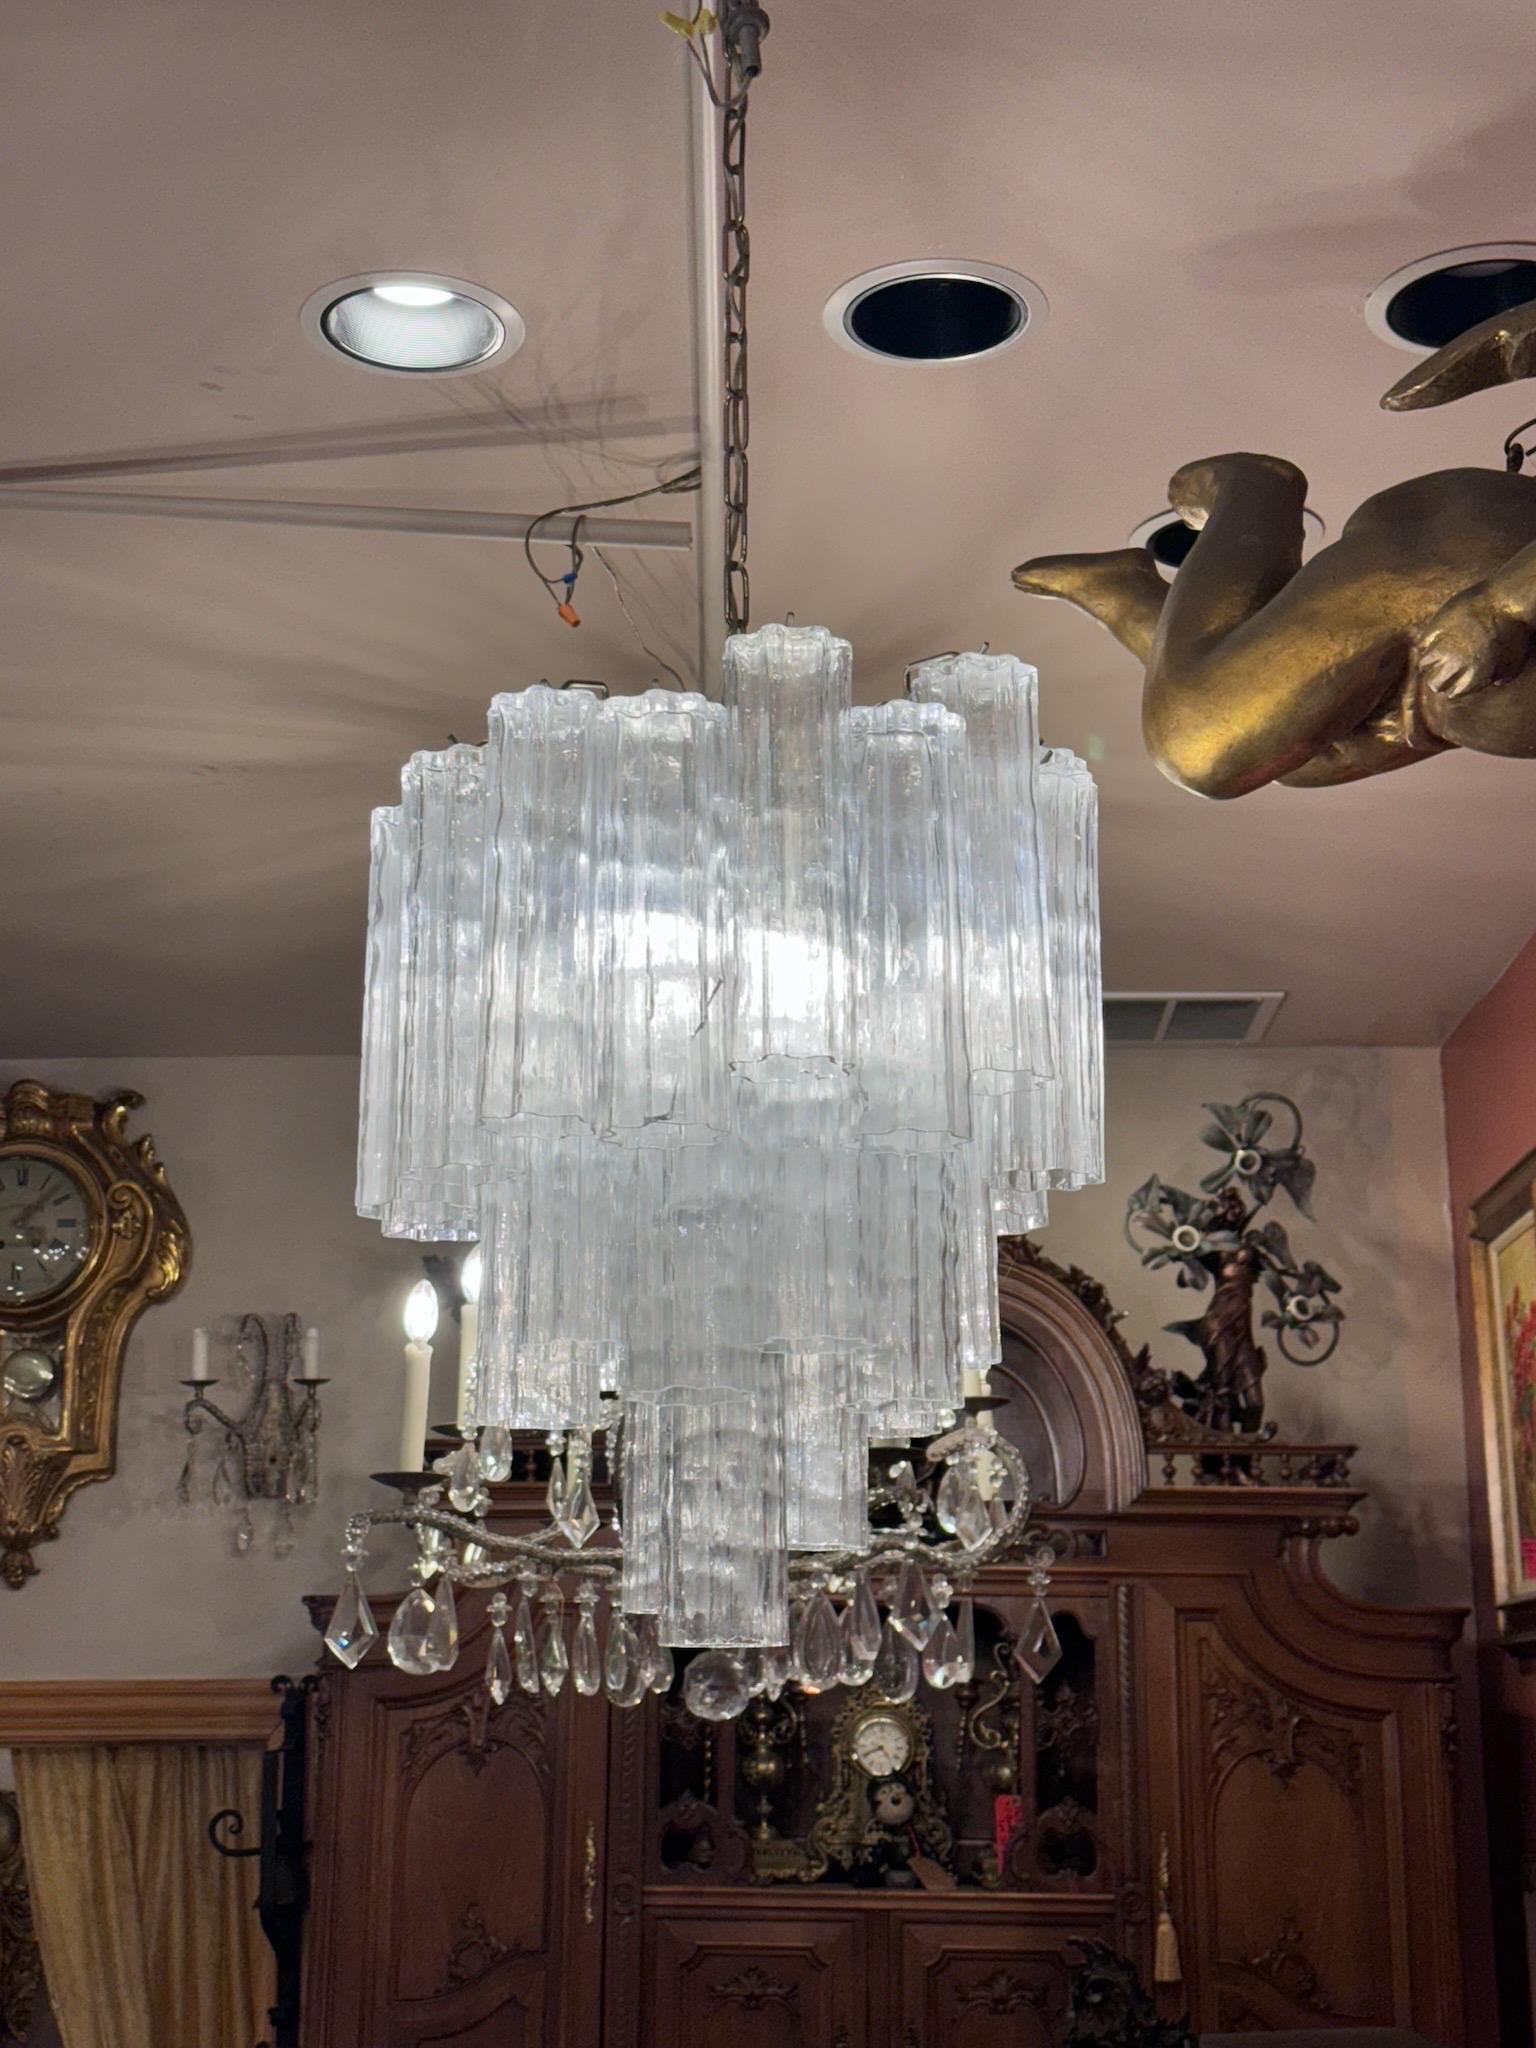 Mid-20th Century Vintage Italian 3 Tier Round Murano Glass Tronchi Ceiling Chandelier For Sale